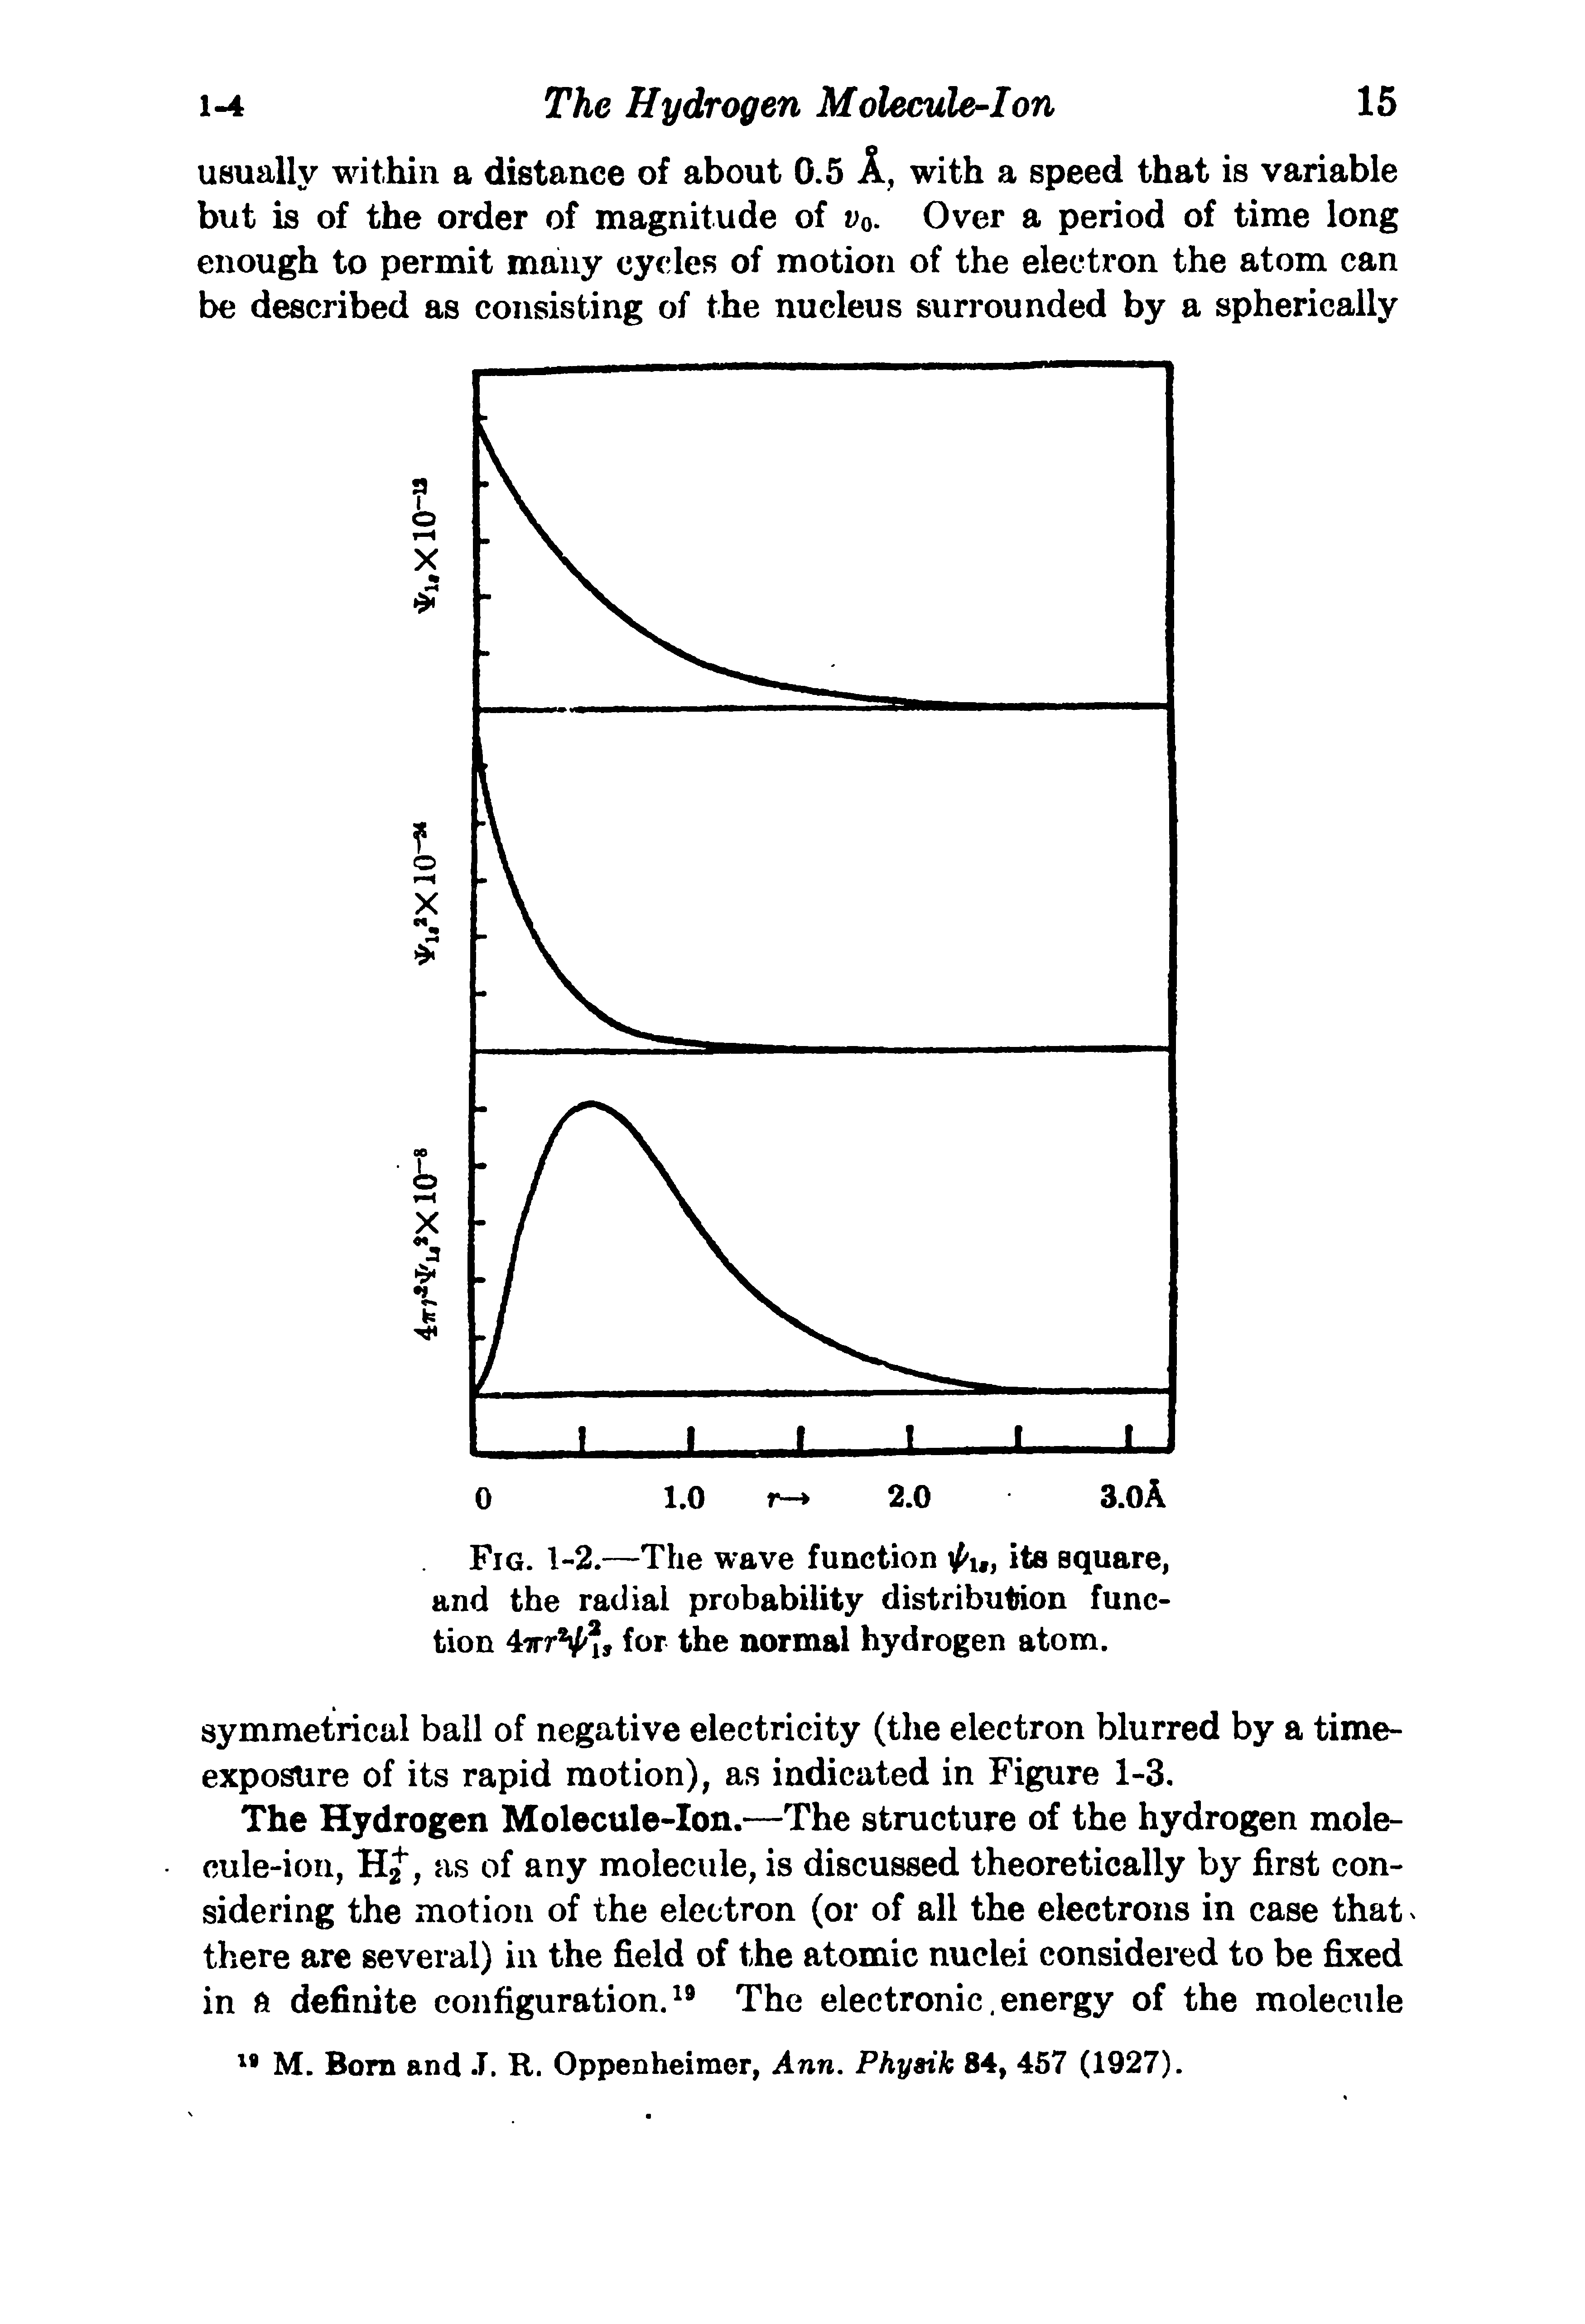 Fig. 1-2.—The wave function u, its square, and the radial probability distribution function 47rrVi fo the normal hydrogen atom.